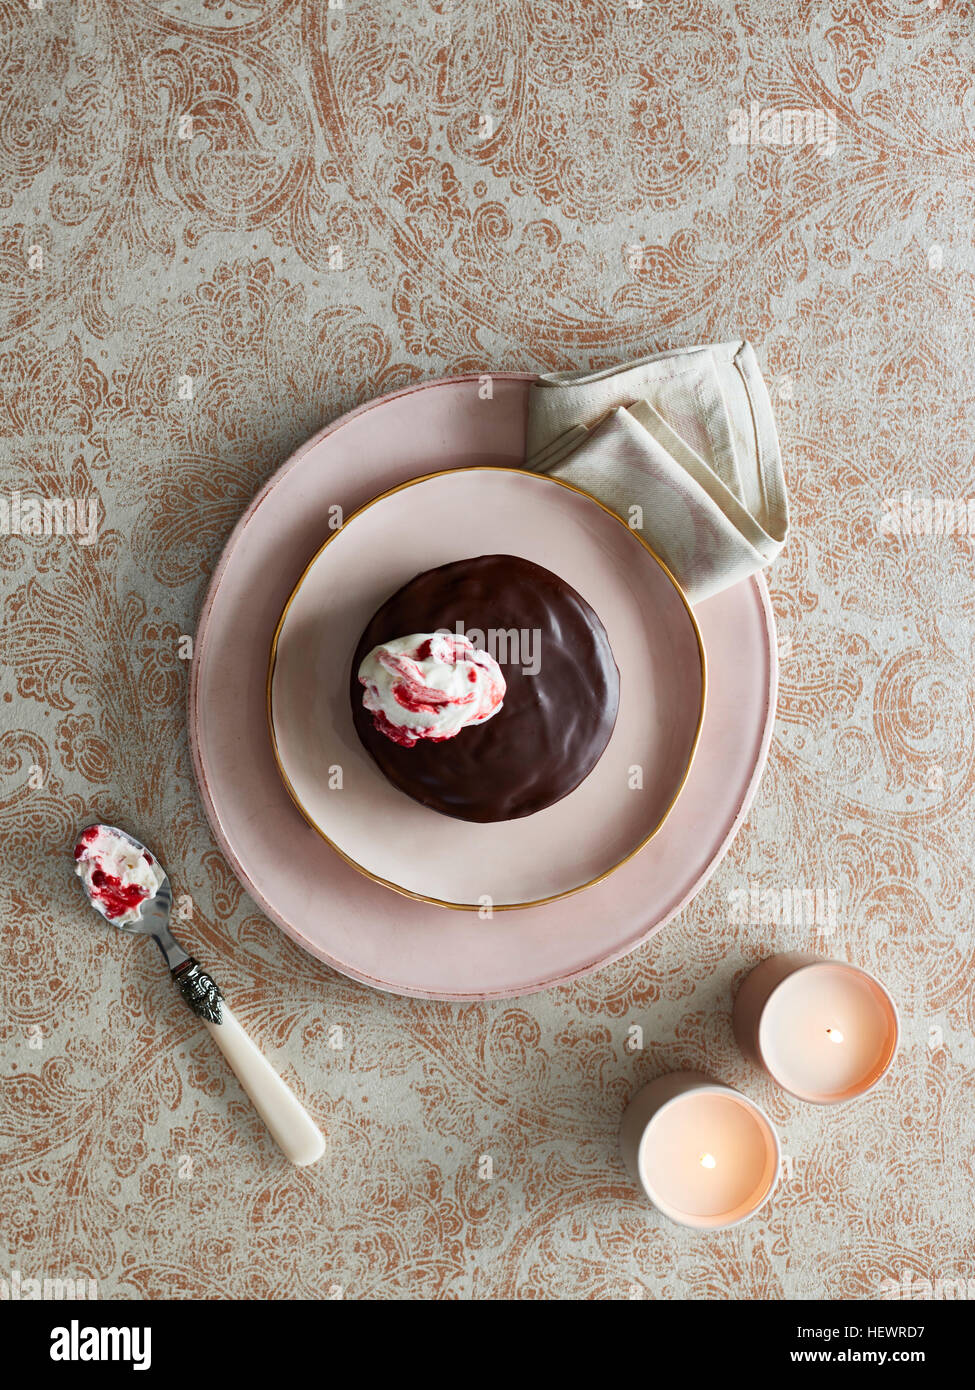 Chocolate pudding with dollop of cream Stock Photo